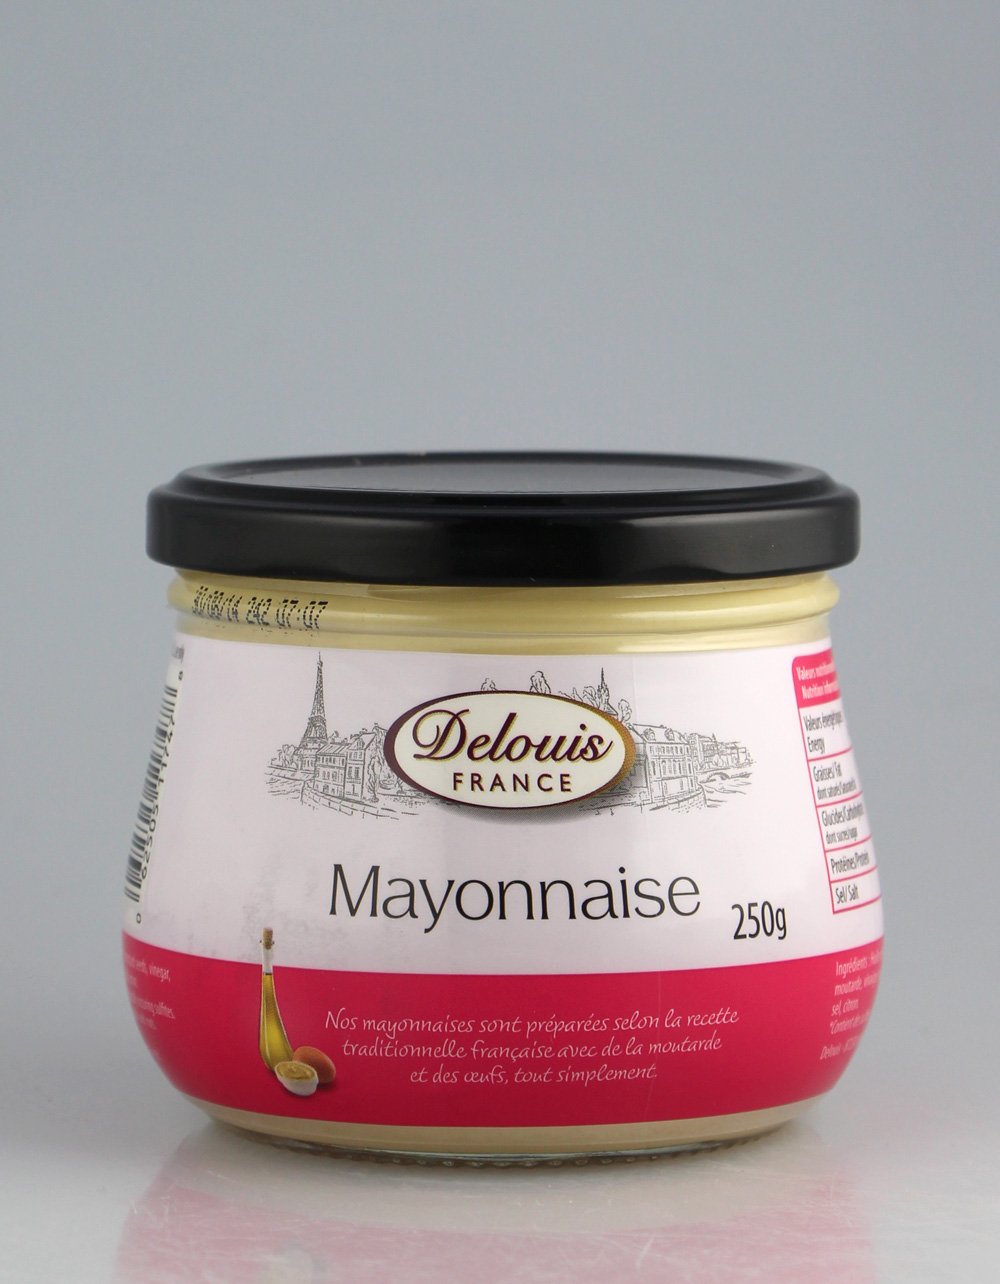 SPECIAL Delouis Mayonnaise 250g